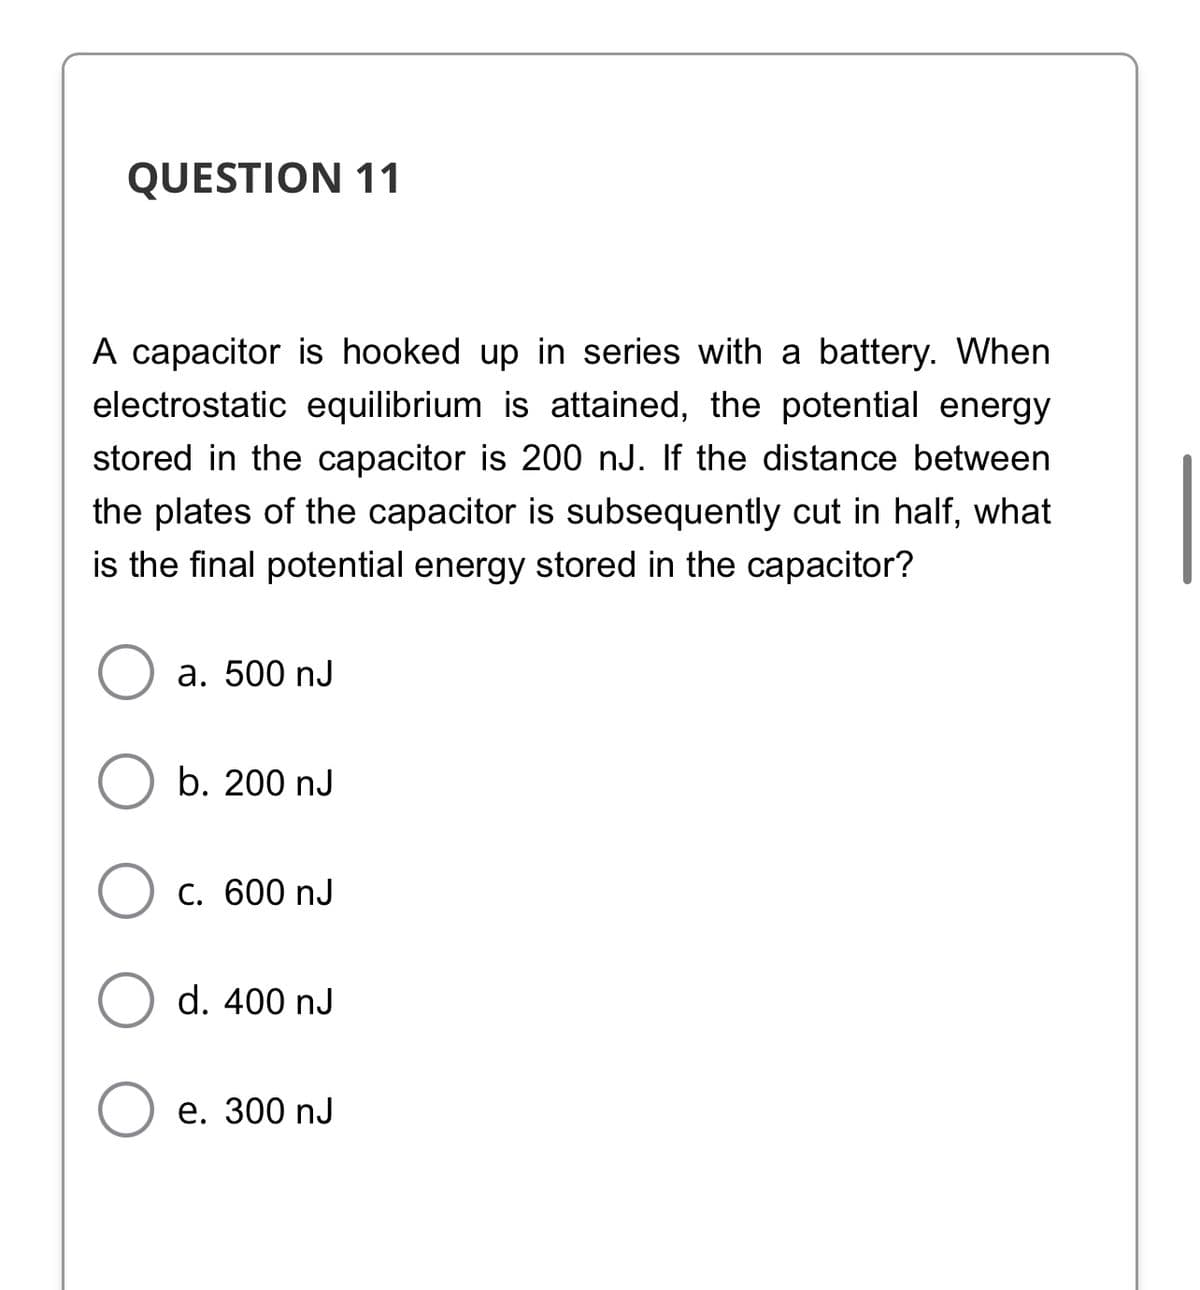 QUESTION 11
A capacitor is hooked up in series with a battery. When
electrostatic equilibrium is attained, the potential energy
stored in the capacitor is 200 nJ. If the distance between
the plates of the capacitor is subsequently cut in half, what
is the final potential energy stored in the capacitor?
а. 500 nJ
b. 200 nJ
C. 600 nJ
d. 400 nJ
е. 300 nJ
